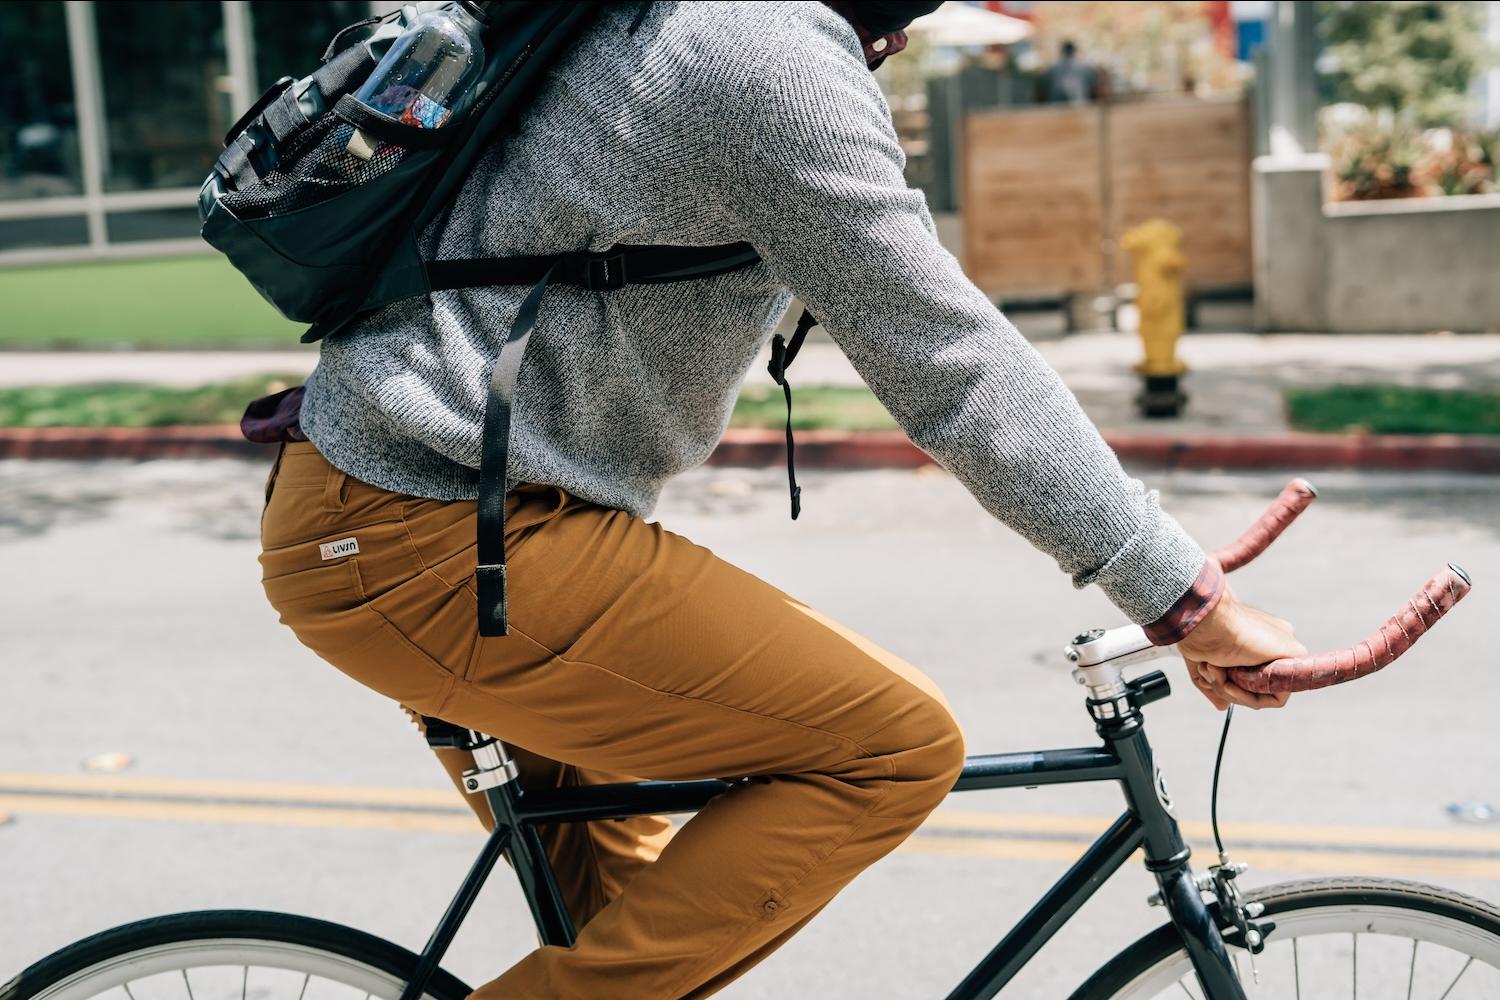 Man riding a bicycle in Livsn pants made from recycled buoys